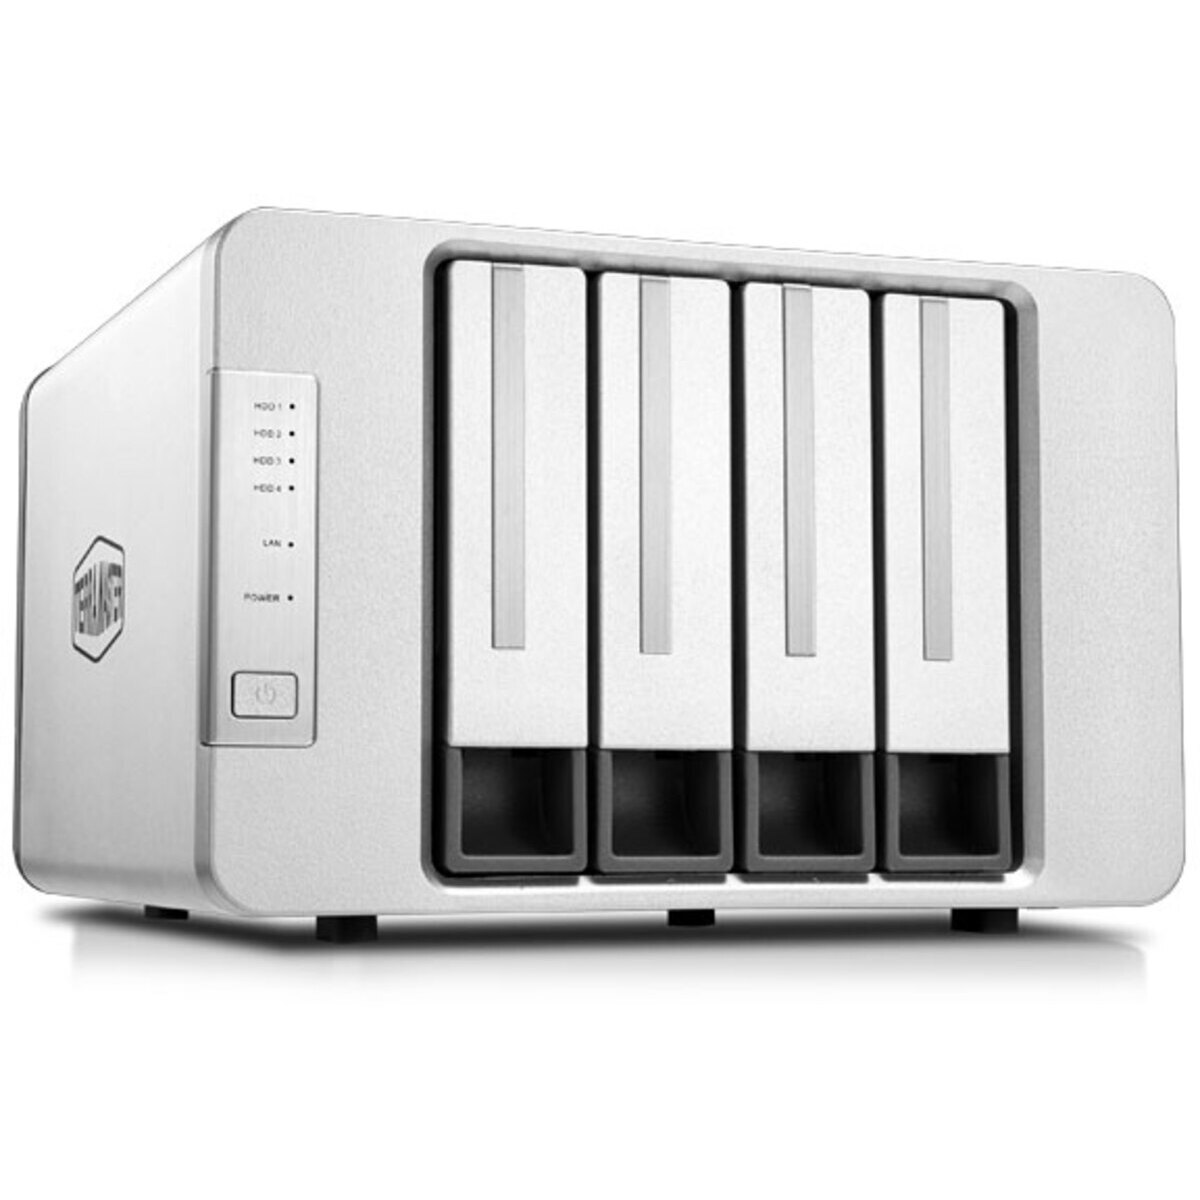 TerraMaster F4-223 6tb 4-Bay Desktop Personal / Basic Home / Small Office NAS - Network Attached Storage Device 3x2tb Crucial MX500 CT2000MX500SSD1 2.5 560/510MB/s SATA 6Gb/s SSD CONSUMER Class Drives Installed - Burn-In Tested - FREE RAM UPGRADE F4-223